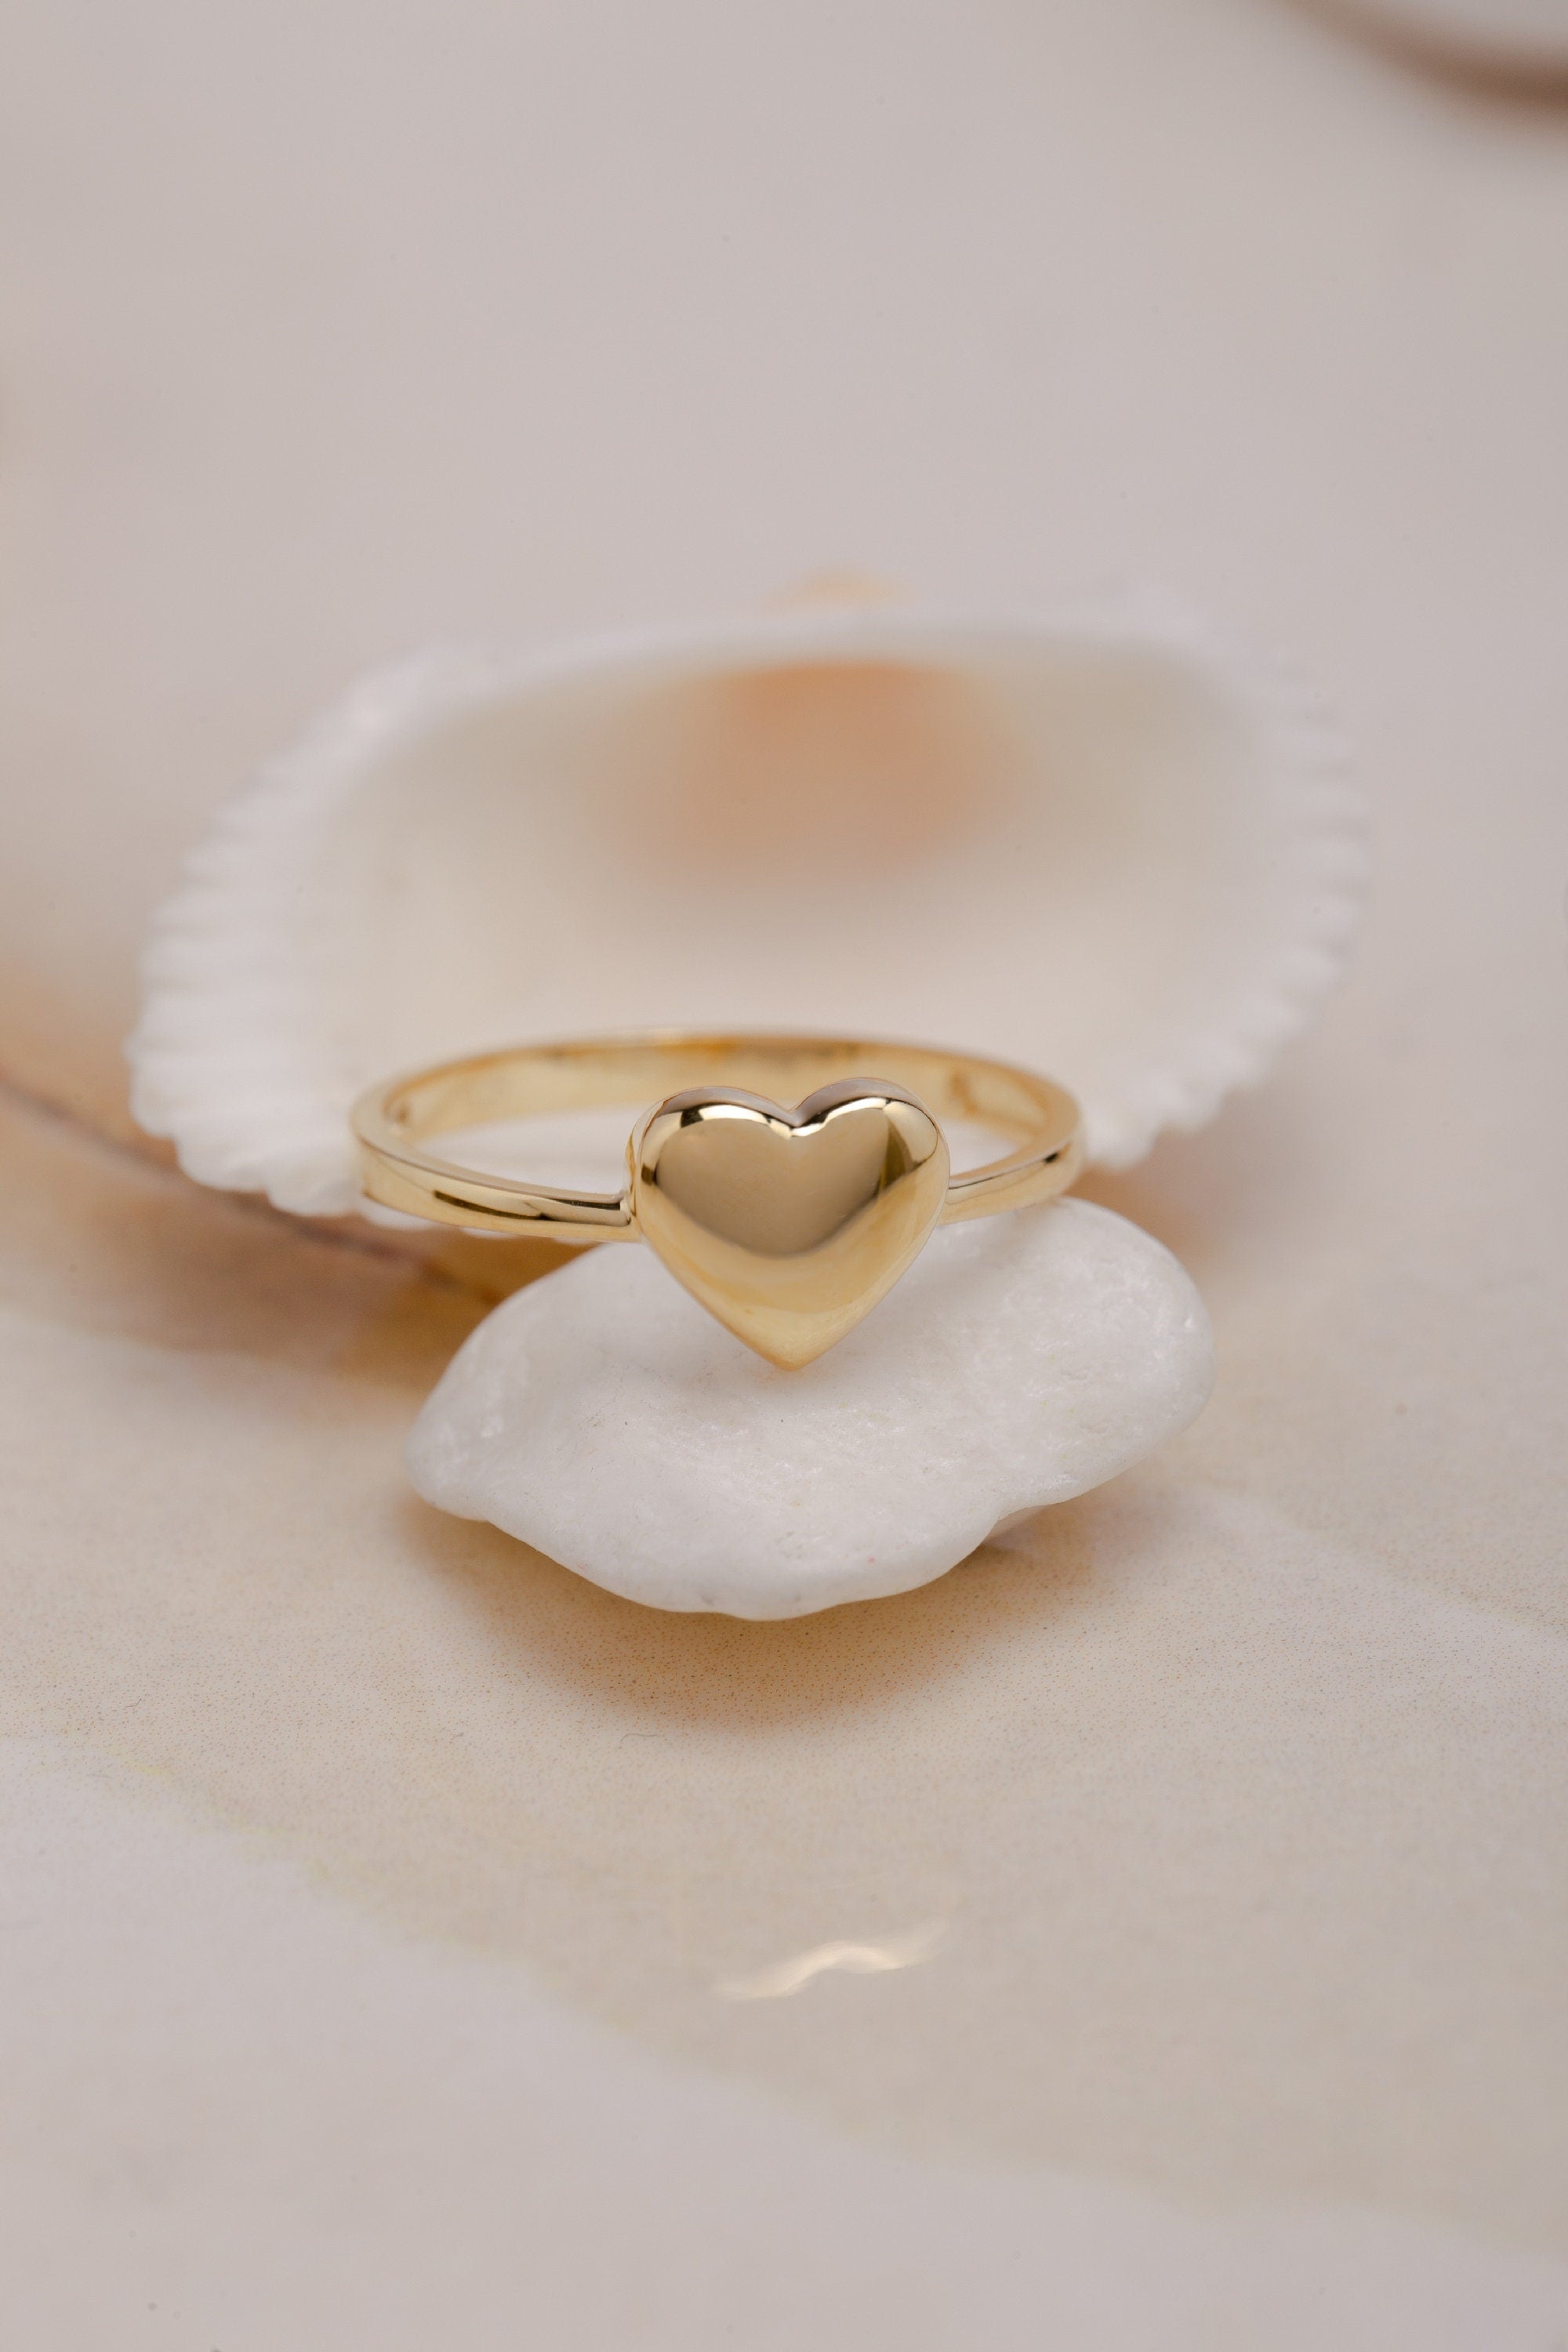 14k Solid Gold Heart Ring, Love Heart Ring, Minimalist Heart Ring, Statement Ring, Gift Ring, Gift For Mother Day, Mother Day Jewelry